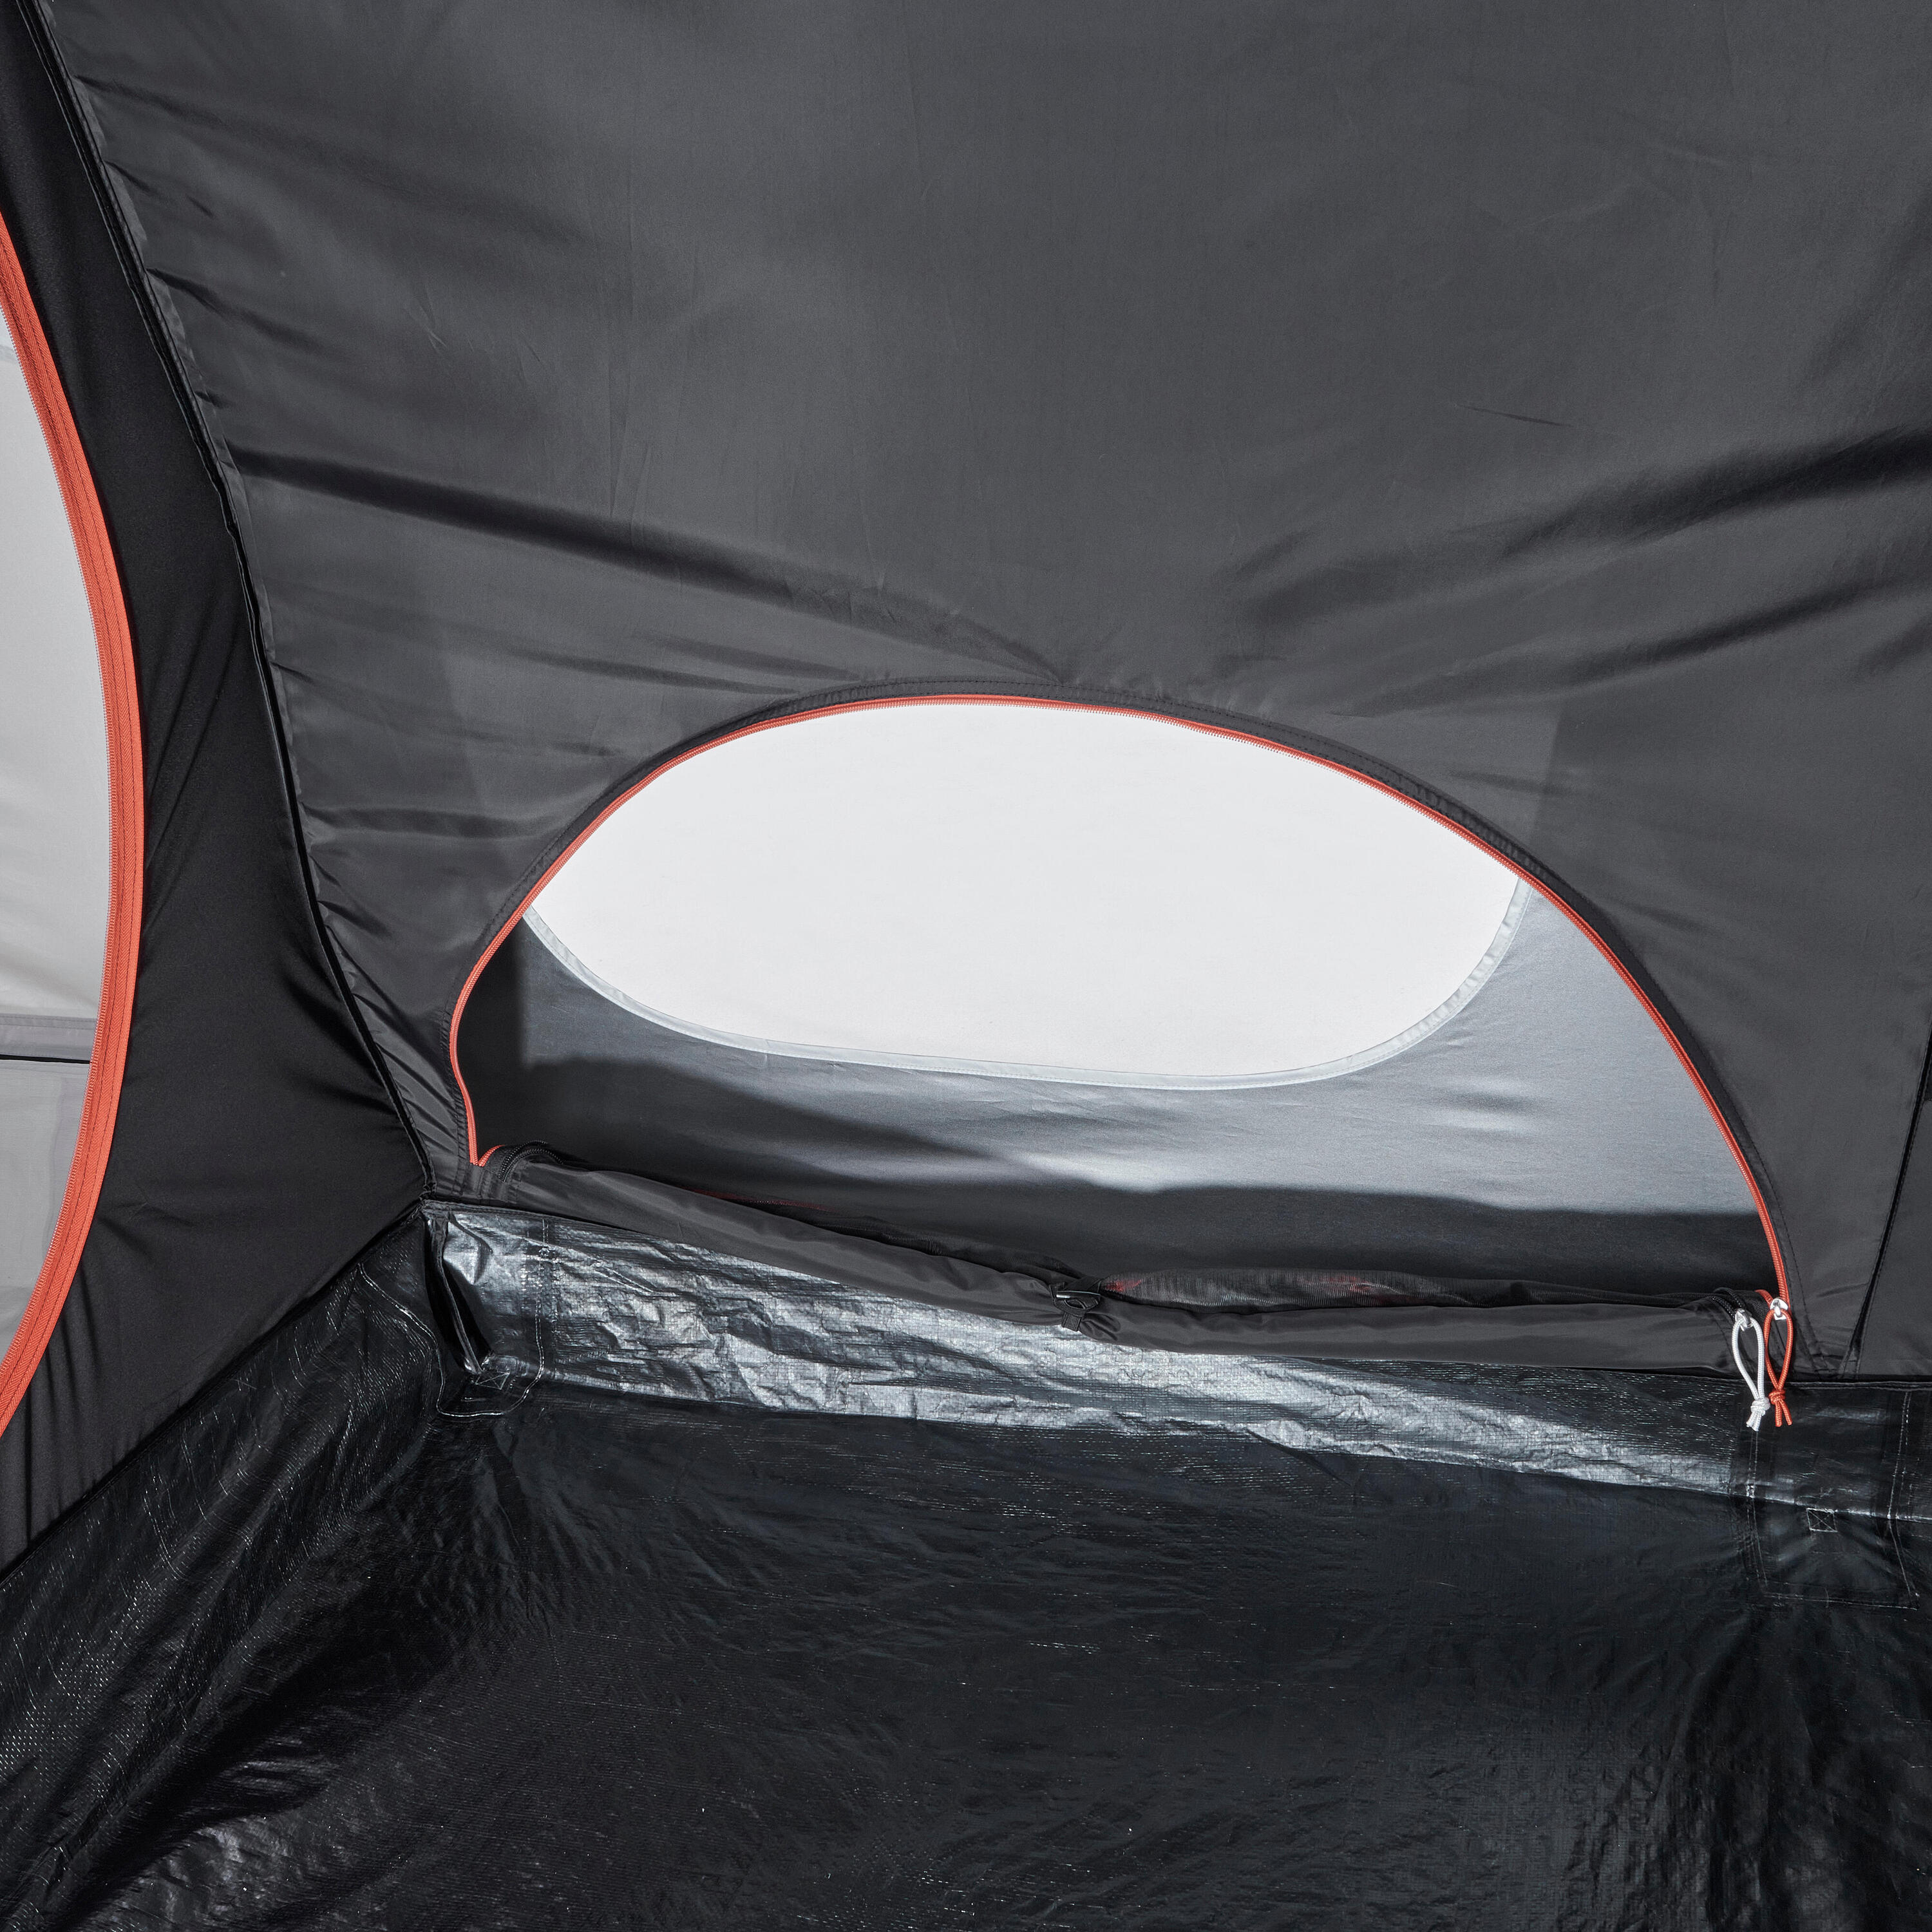 Inflatable camping tent - Air Seconds 5.2 F&B - 5 People - 2 Inner tubes 29/37